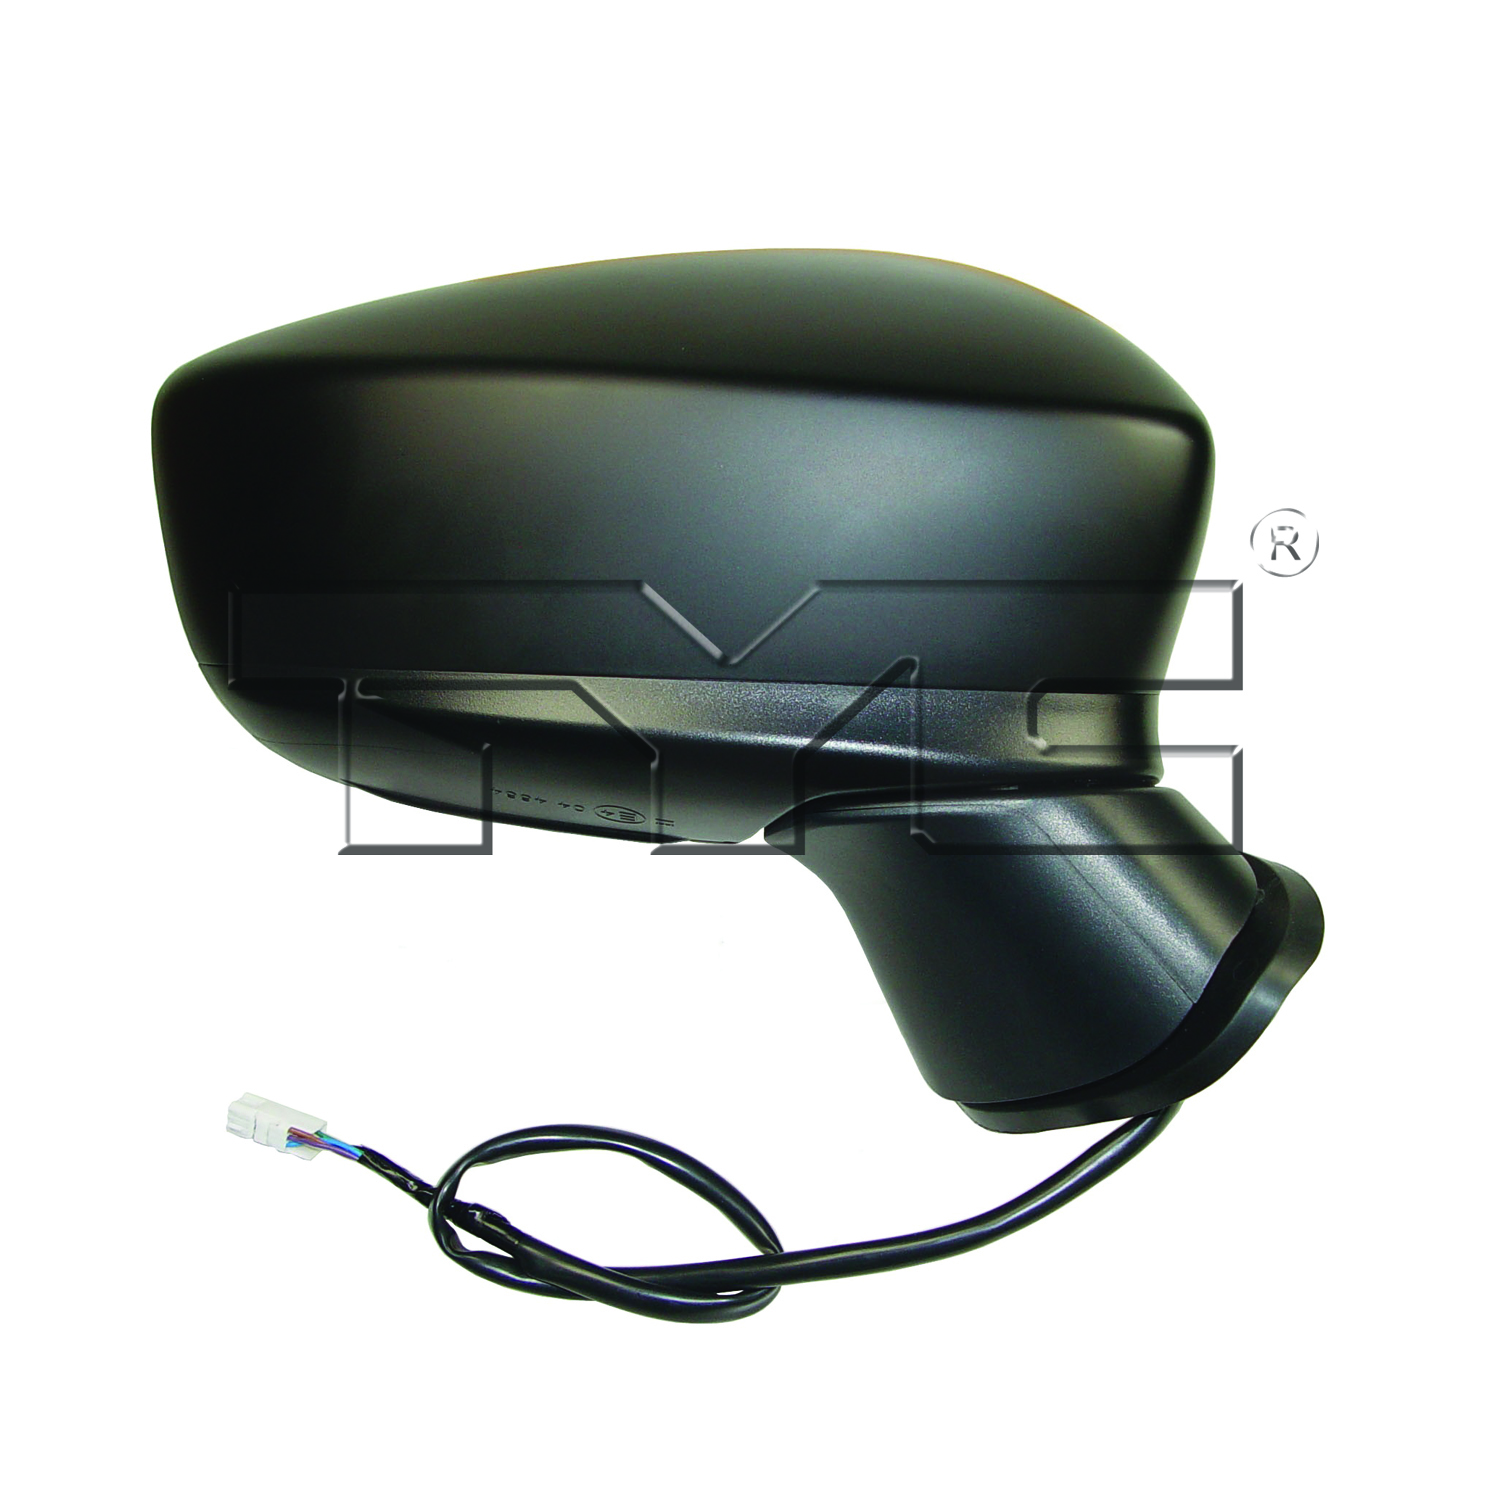 Aftermarket MIRRORS for MAZDA - 3, 3,14-15,RT Mirror outside rear view